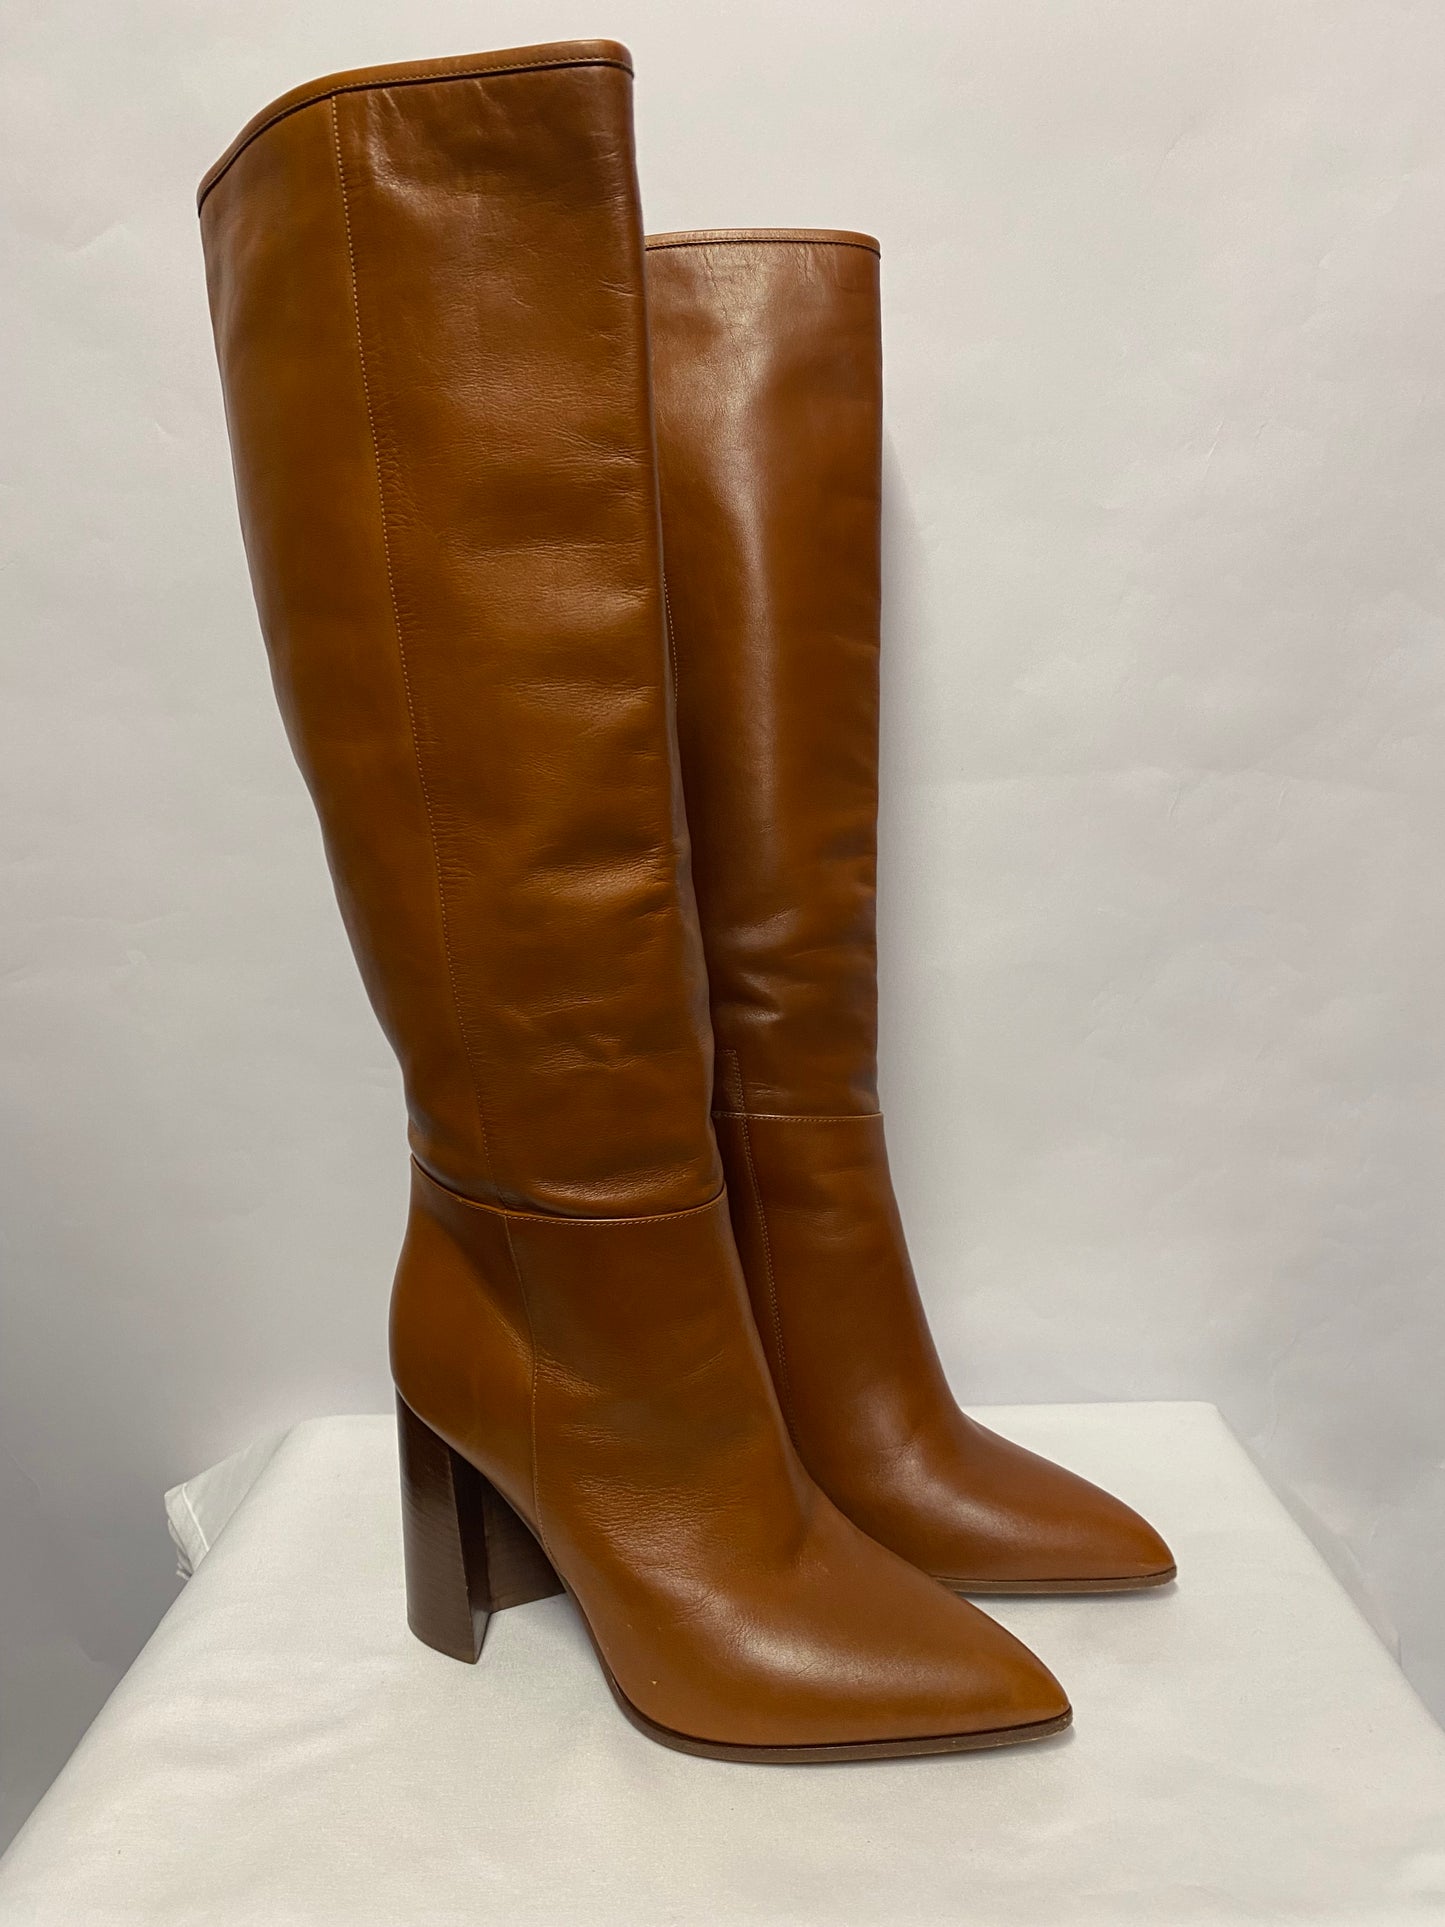 M Gemi Brown Leather Heeled Boots 6.5